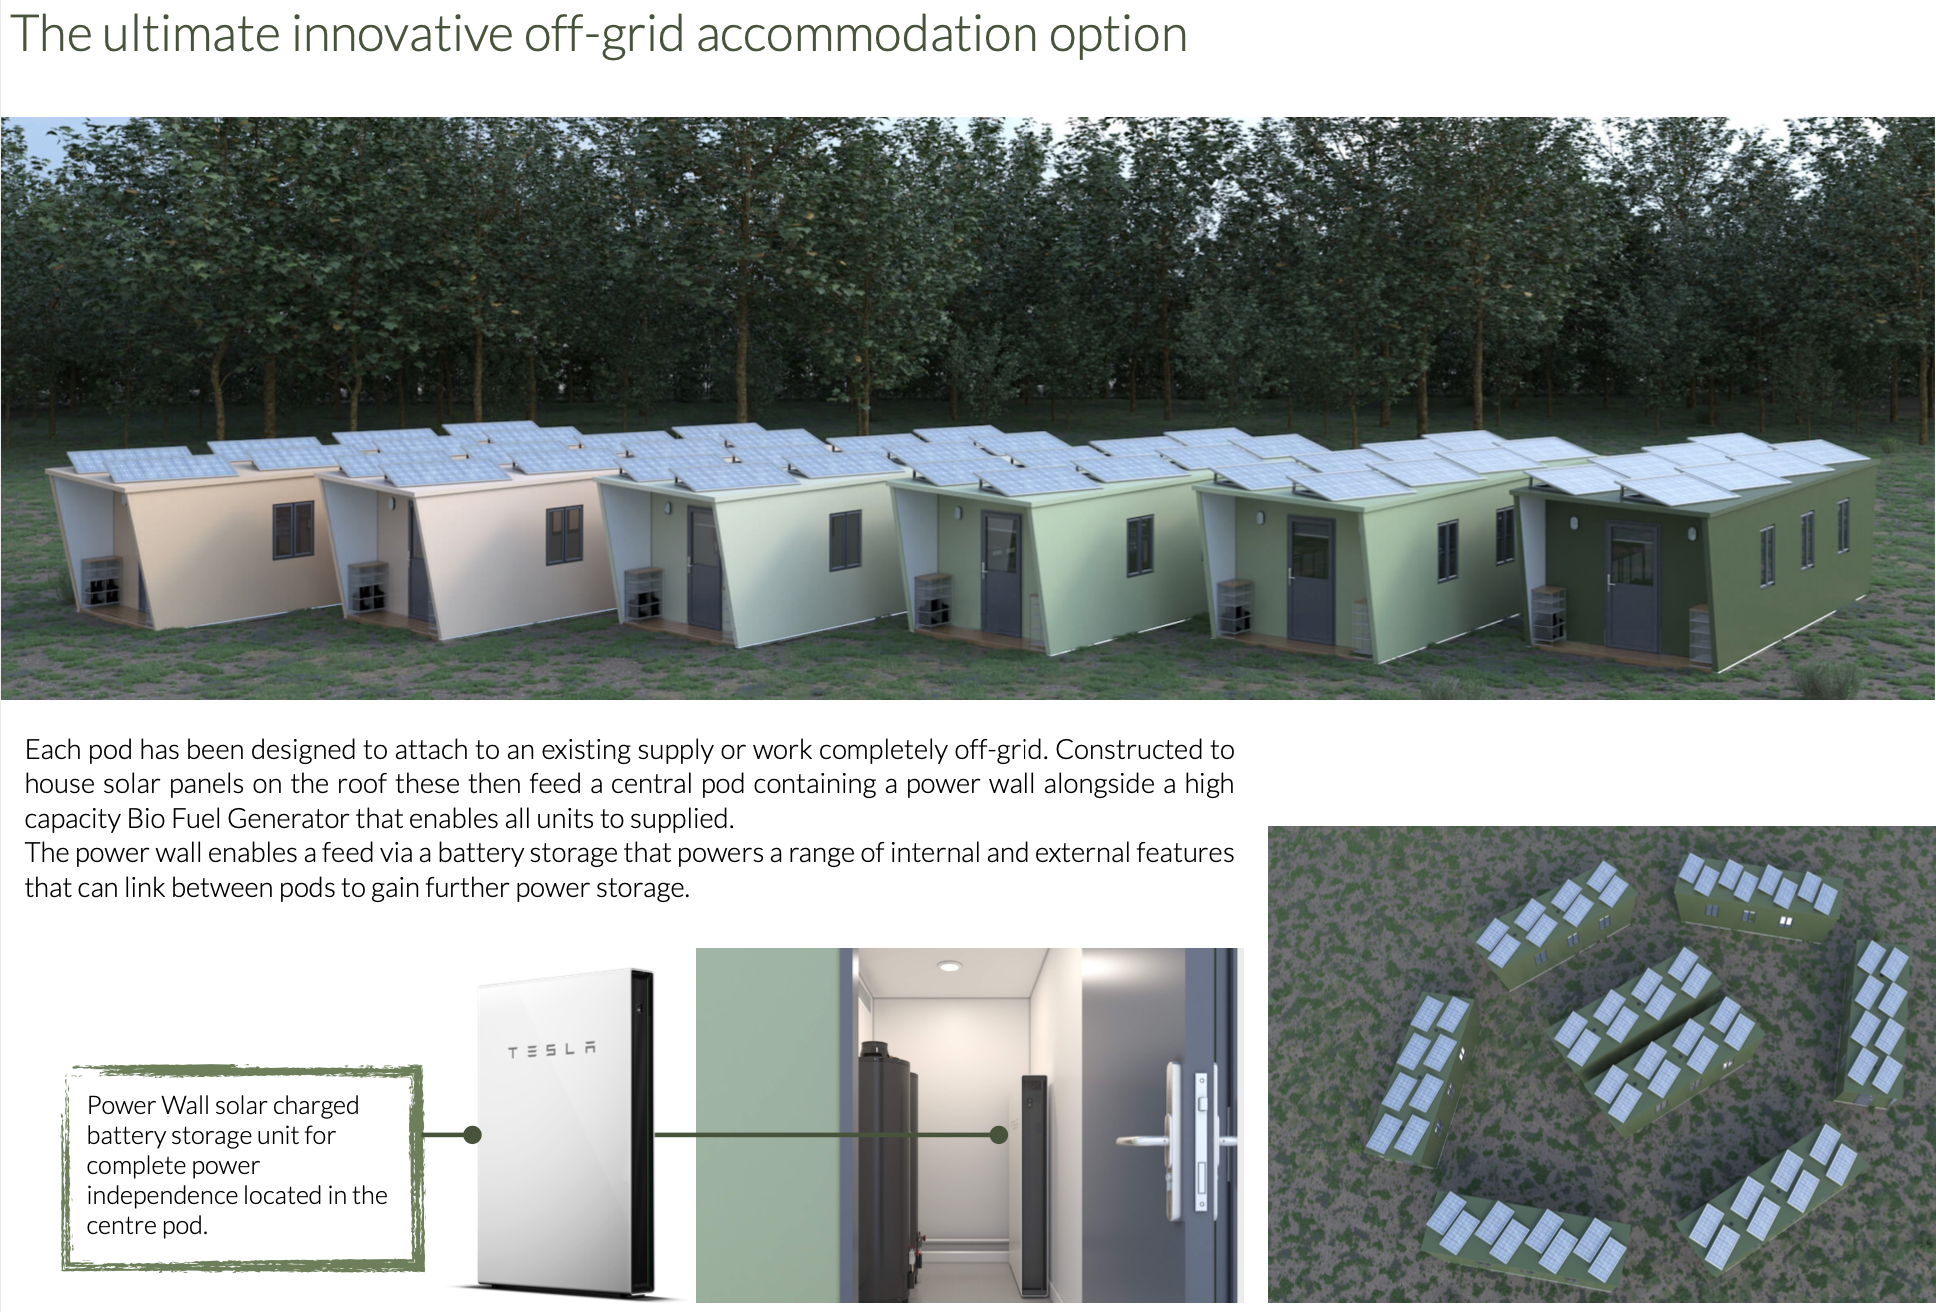 The ultimate innovative off-grid accommodation option